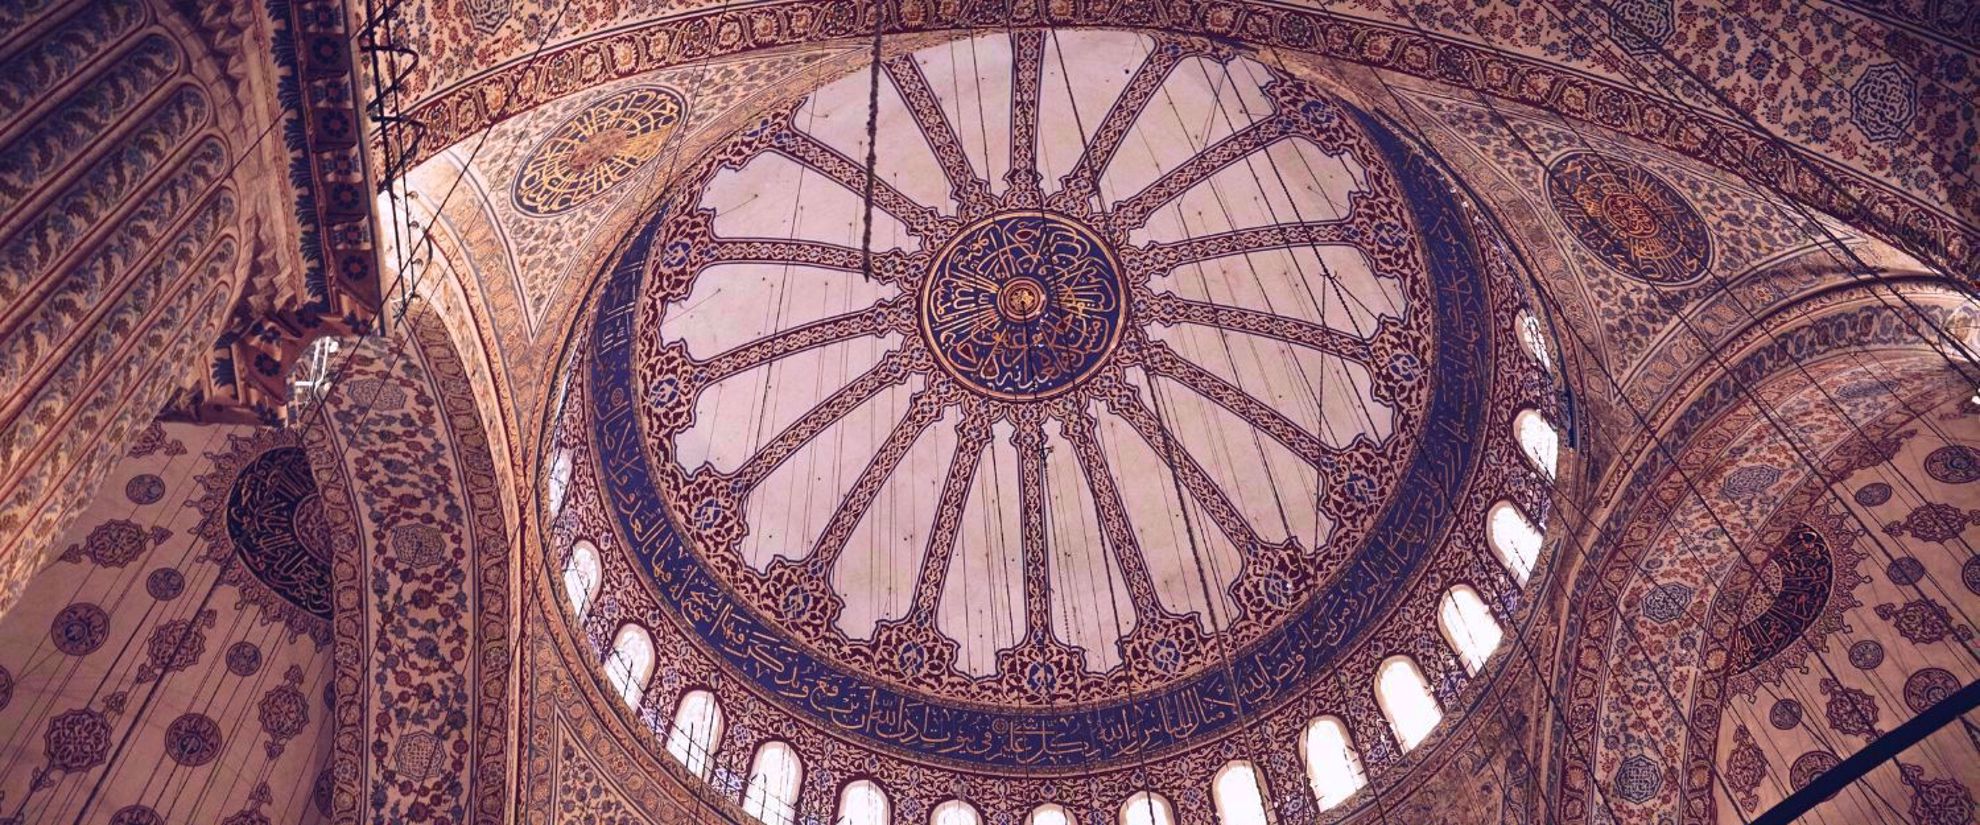 Blue Mosque ceiling in Istanbul, Tuekey